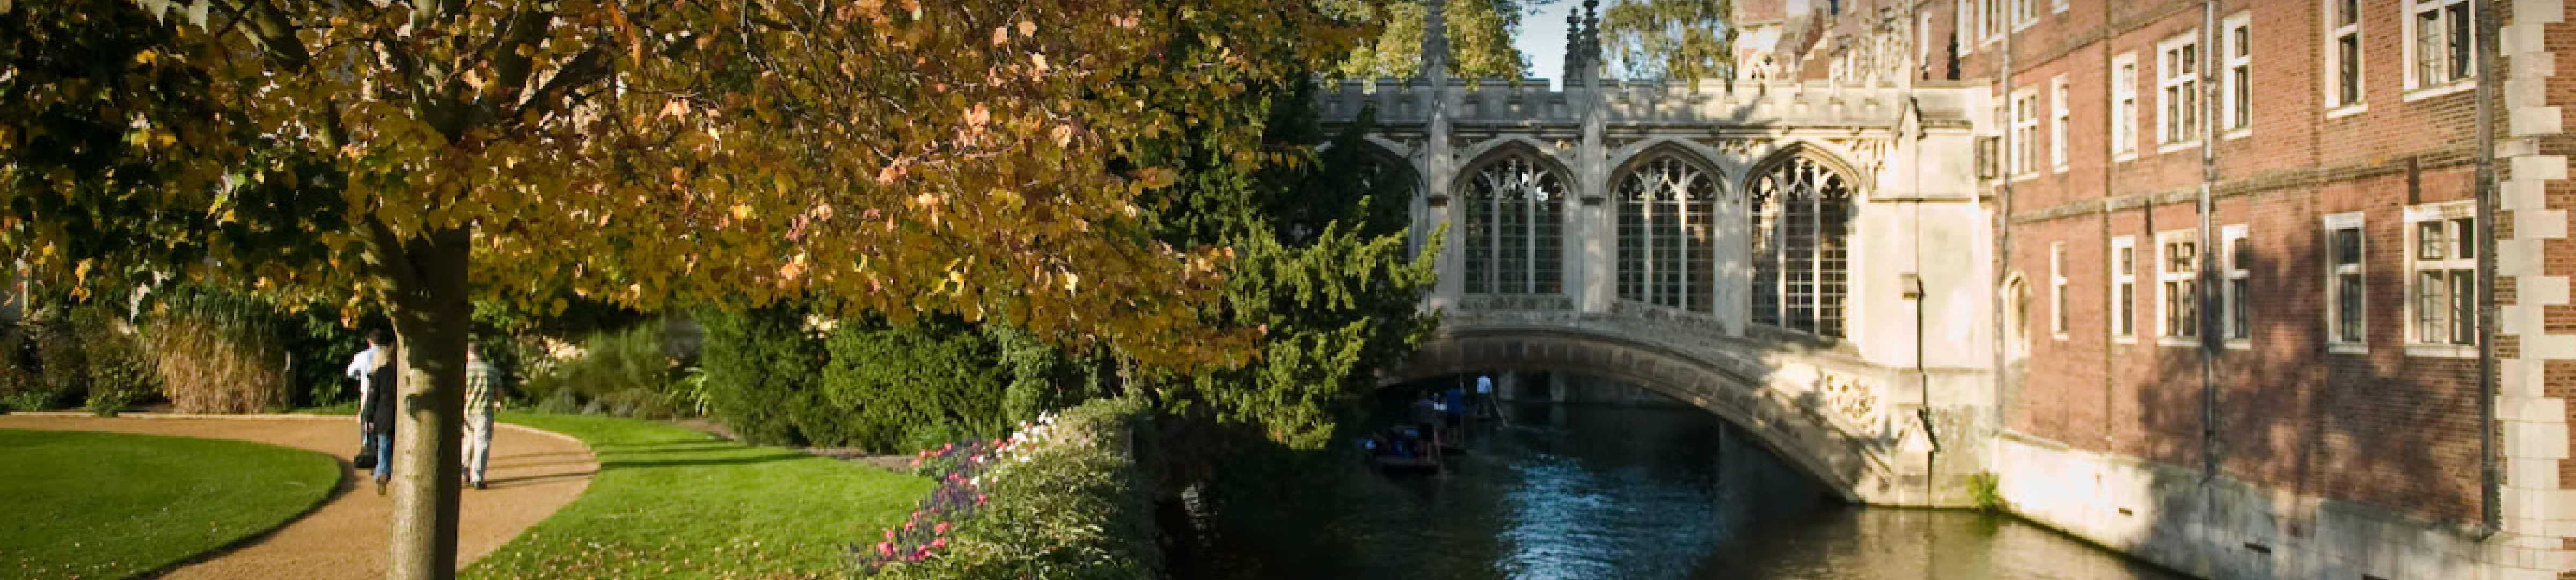 A photo of the bridge of sighs and surrounding gardens